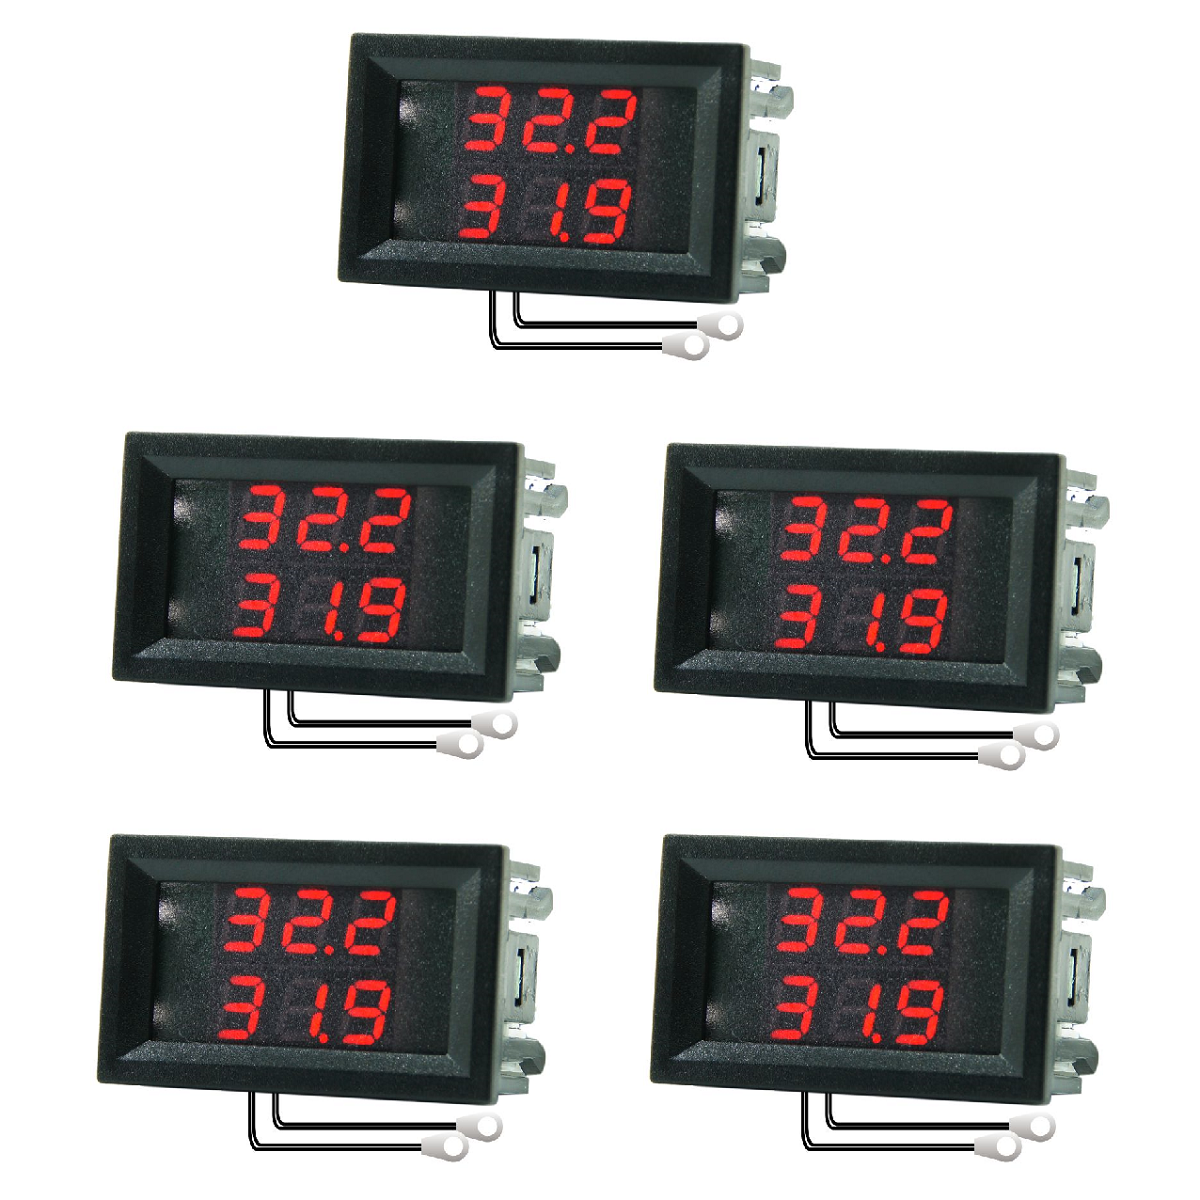 DC 4-28V Red+Blue Fahrenheit Dual Display Digital Thermometer with 2 NTC  Waterproof Metal Probes Temperature Sensor